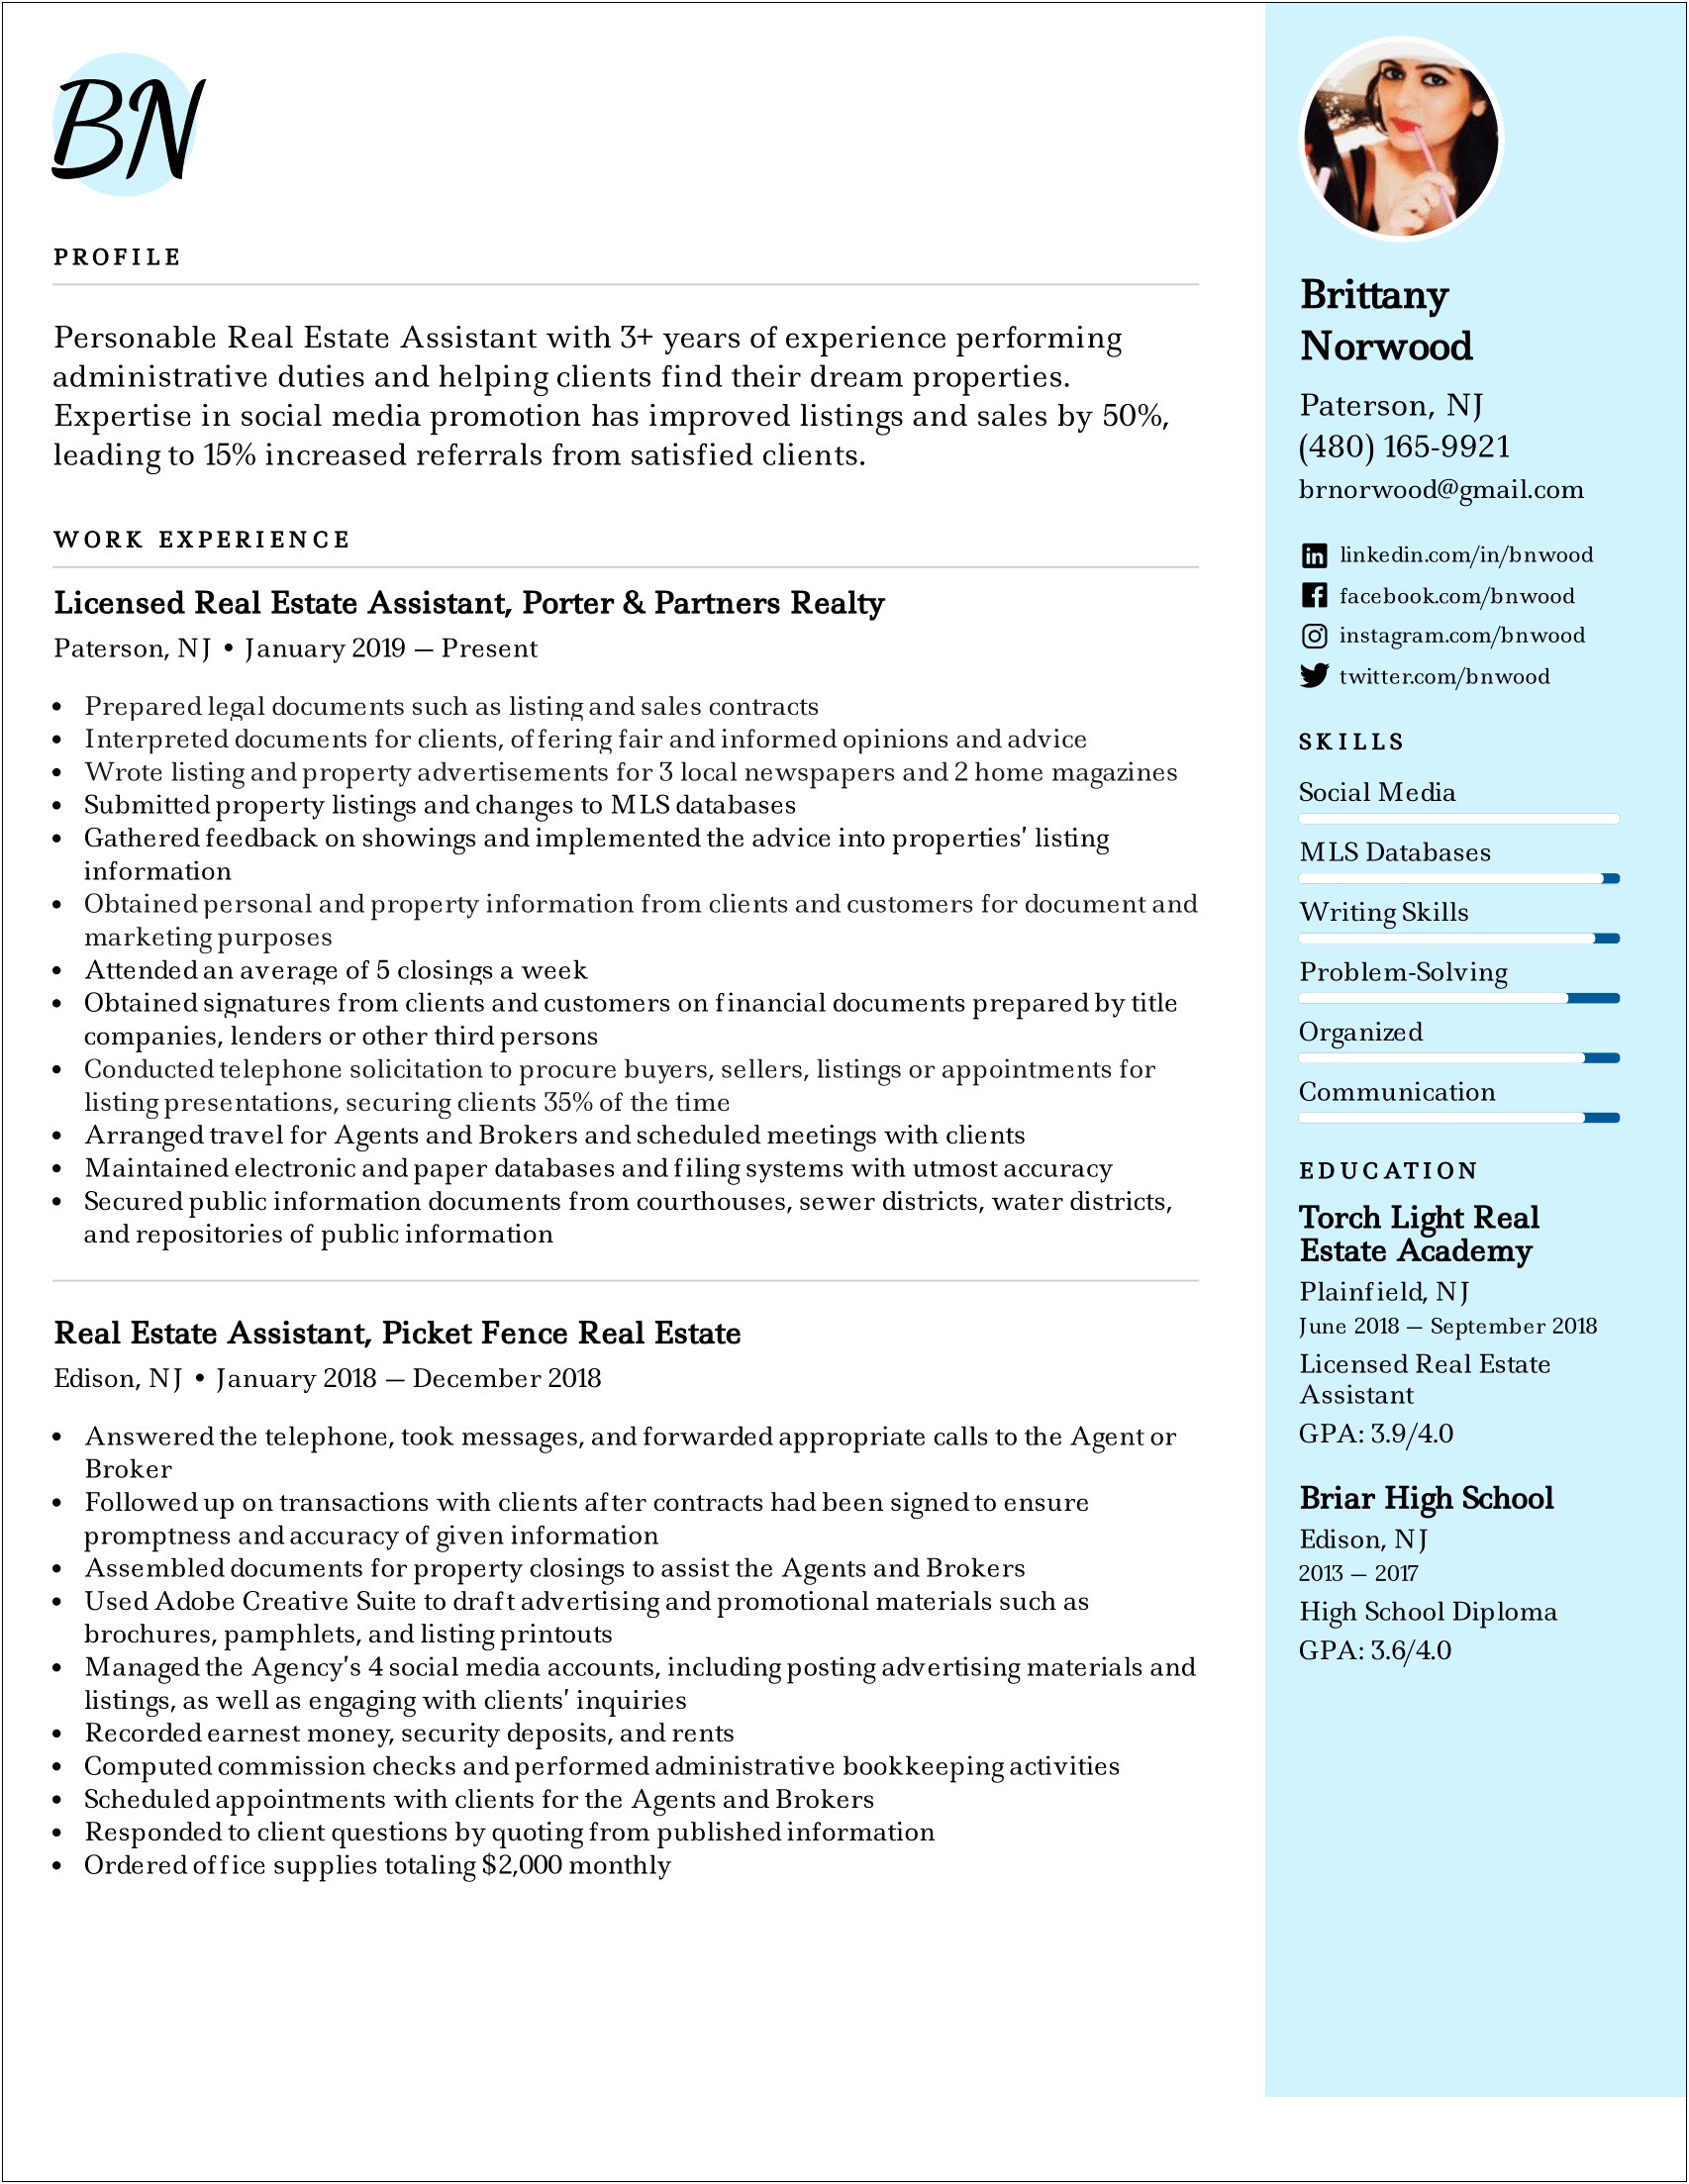 Example Of Dental Assistant Resume With No Experience